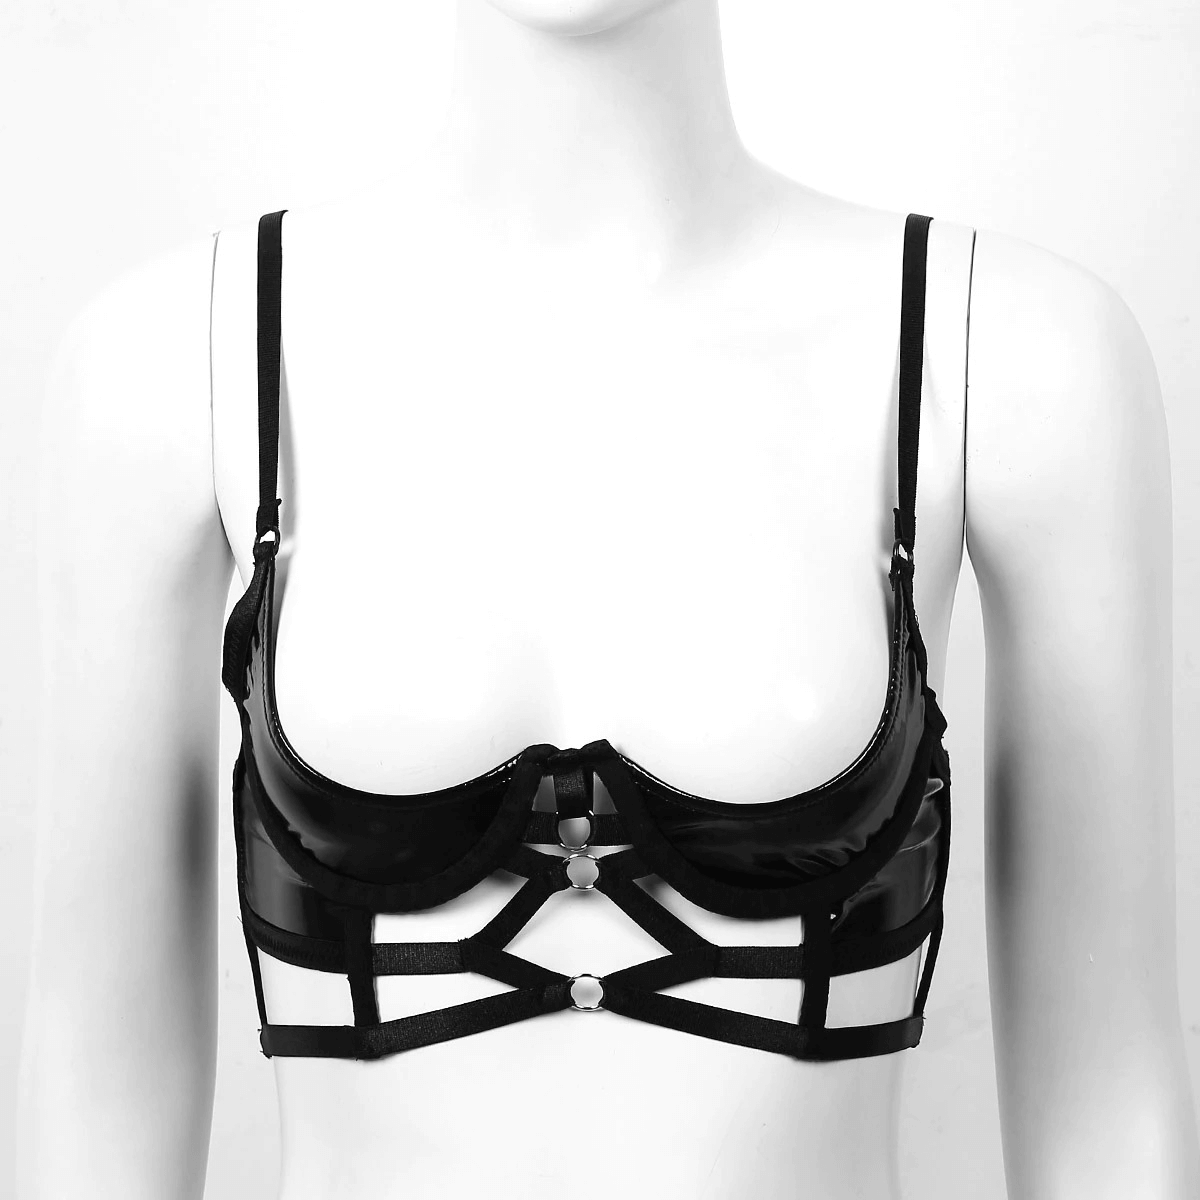 CLEARANCE / Women's Sexy Bustier with Open Cup / Adjustable Straps Erotic Bra in Black Color - HARD'N'HEAVY